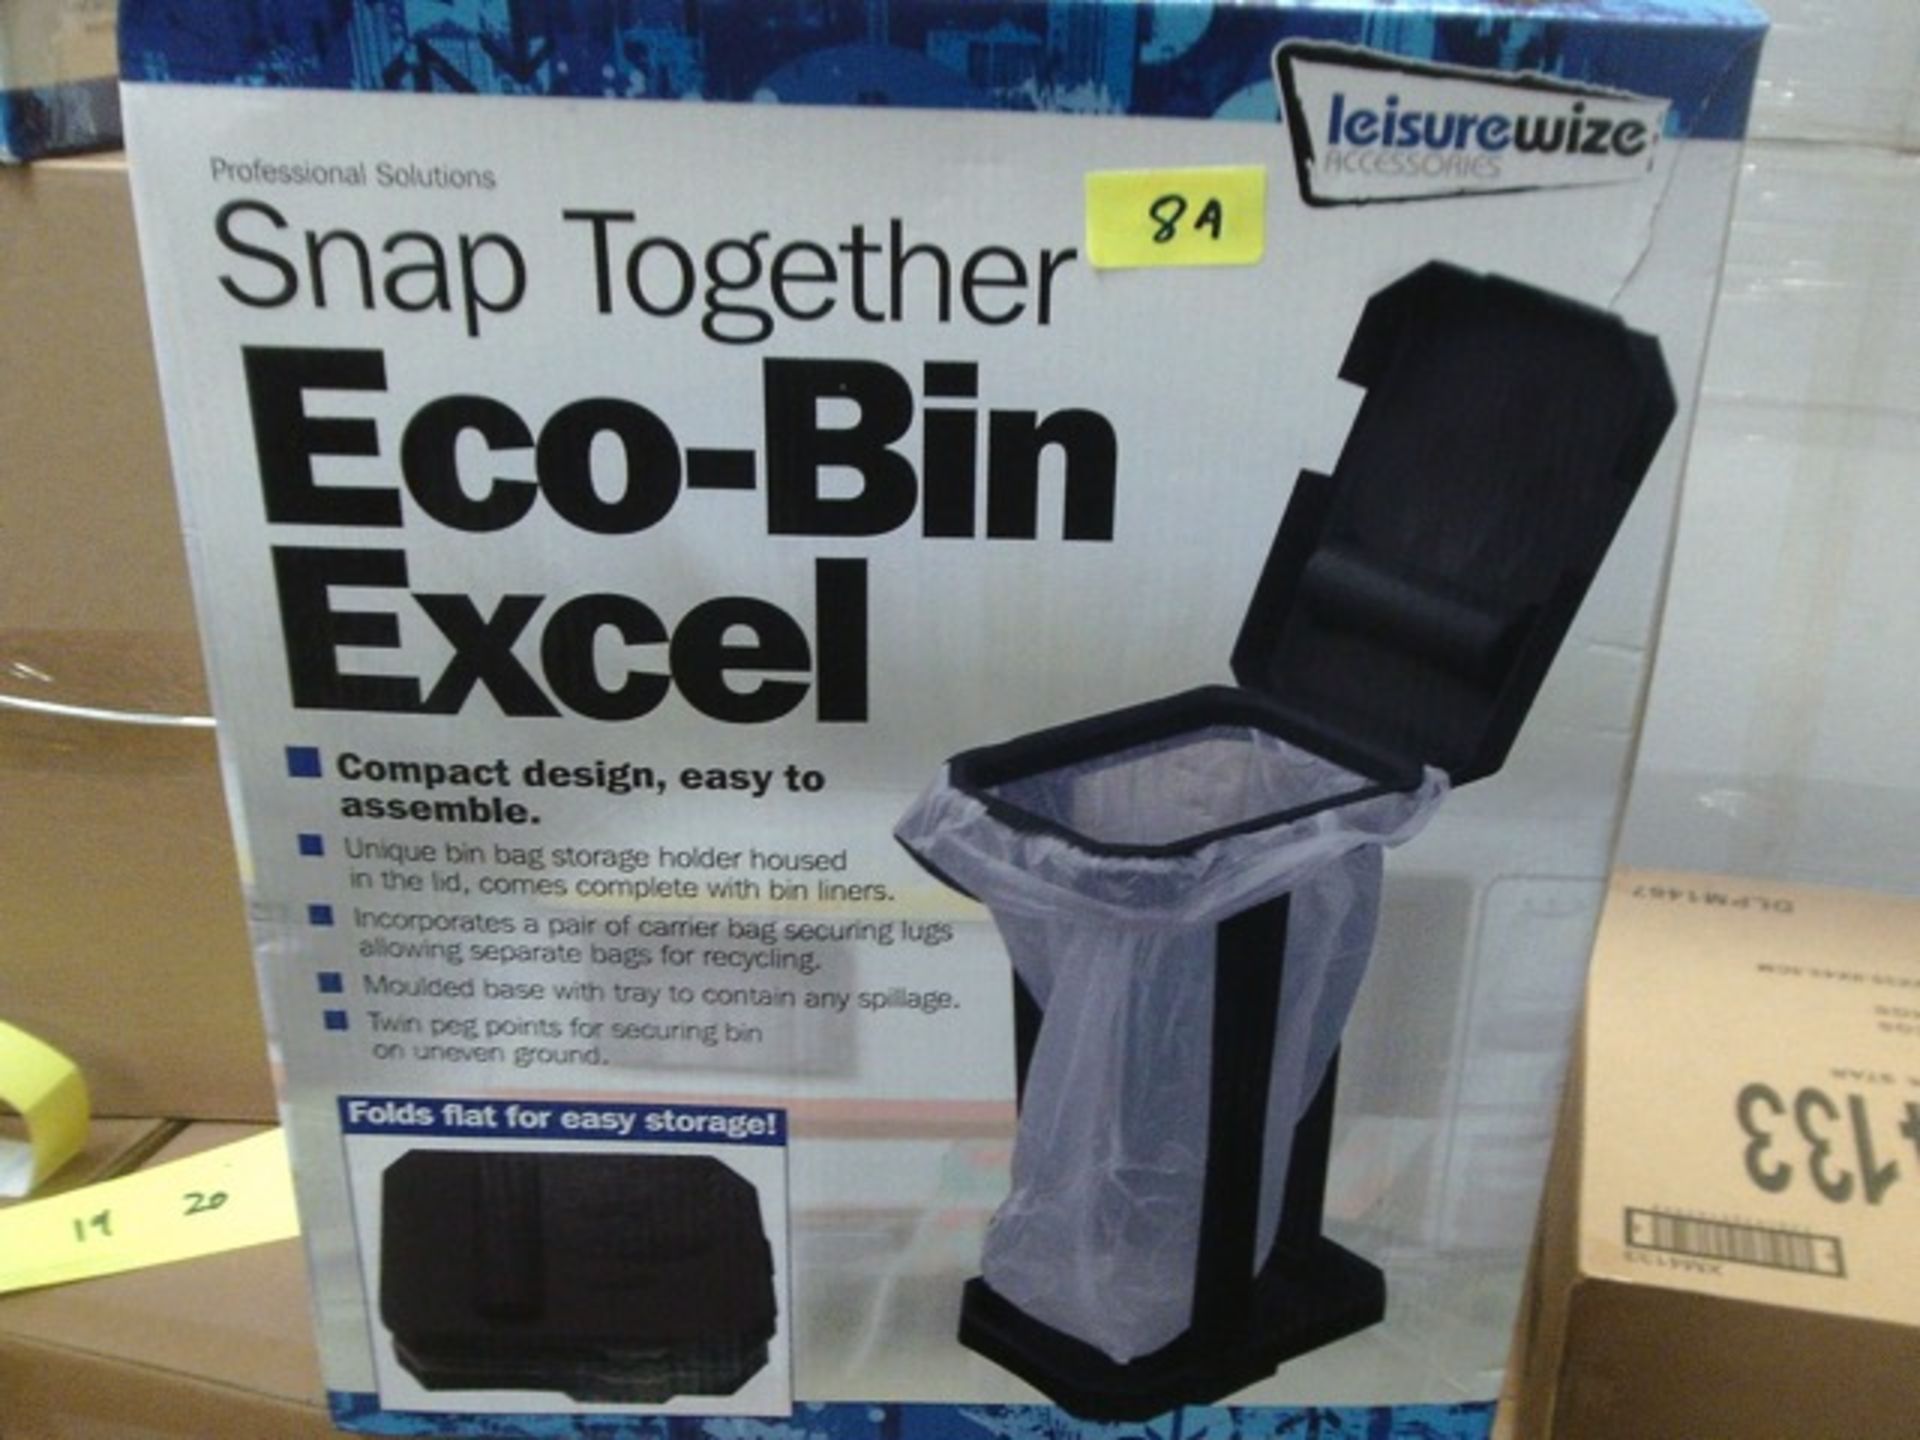 Streetwise Snap together Eco Bin Excel - rrp £19.99.